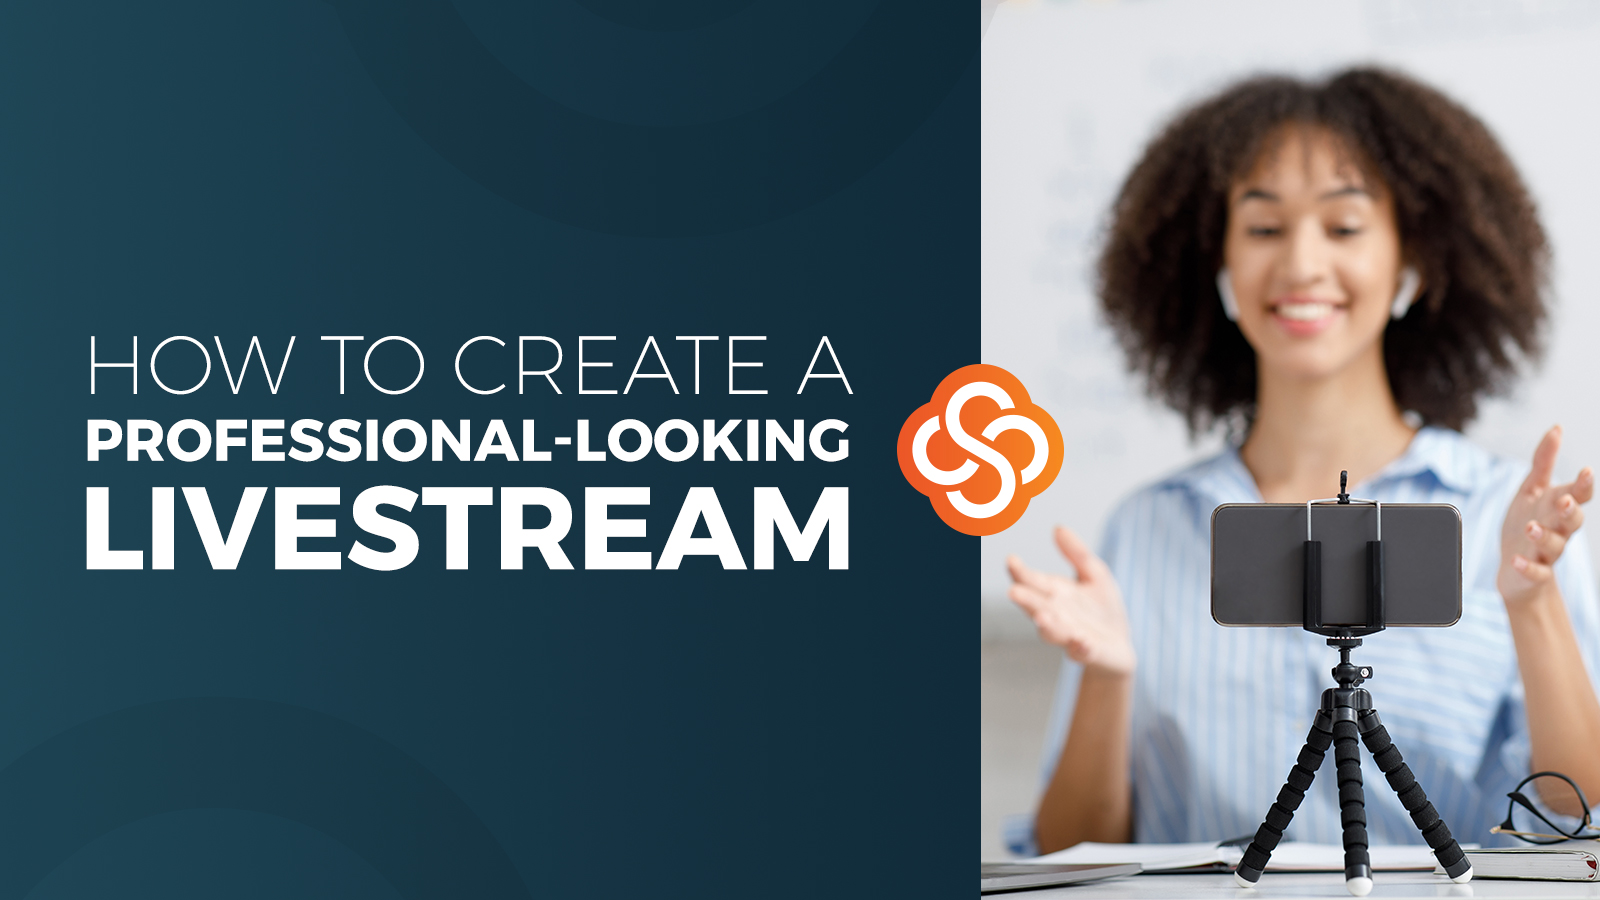 How to Create a Professional-Looking Livestream